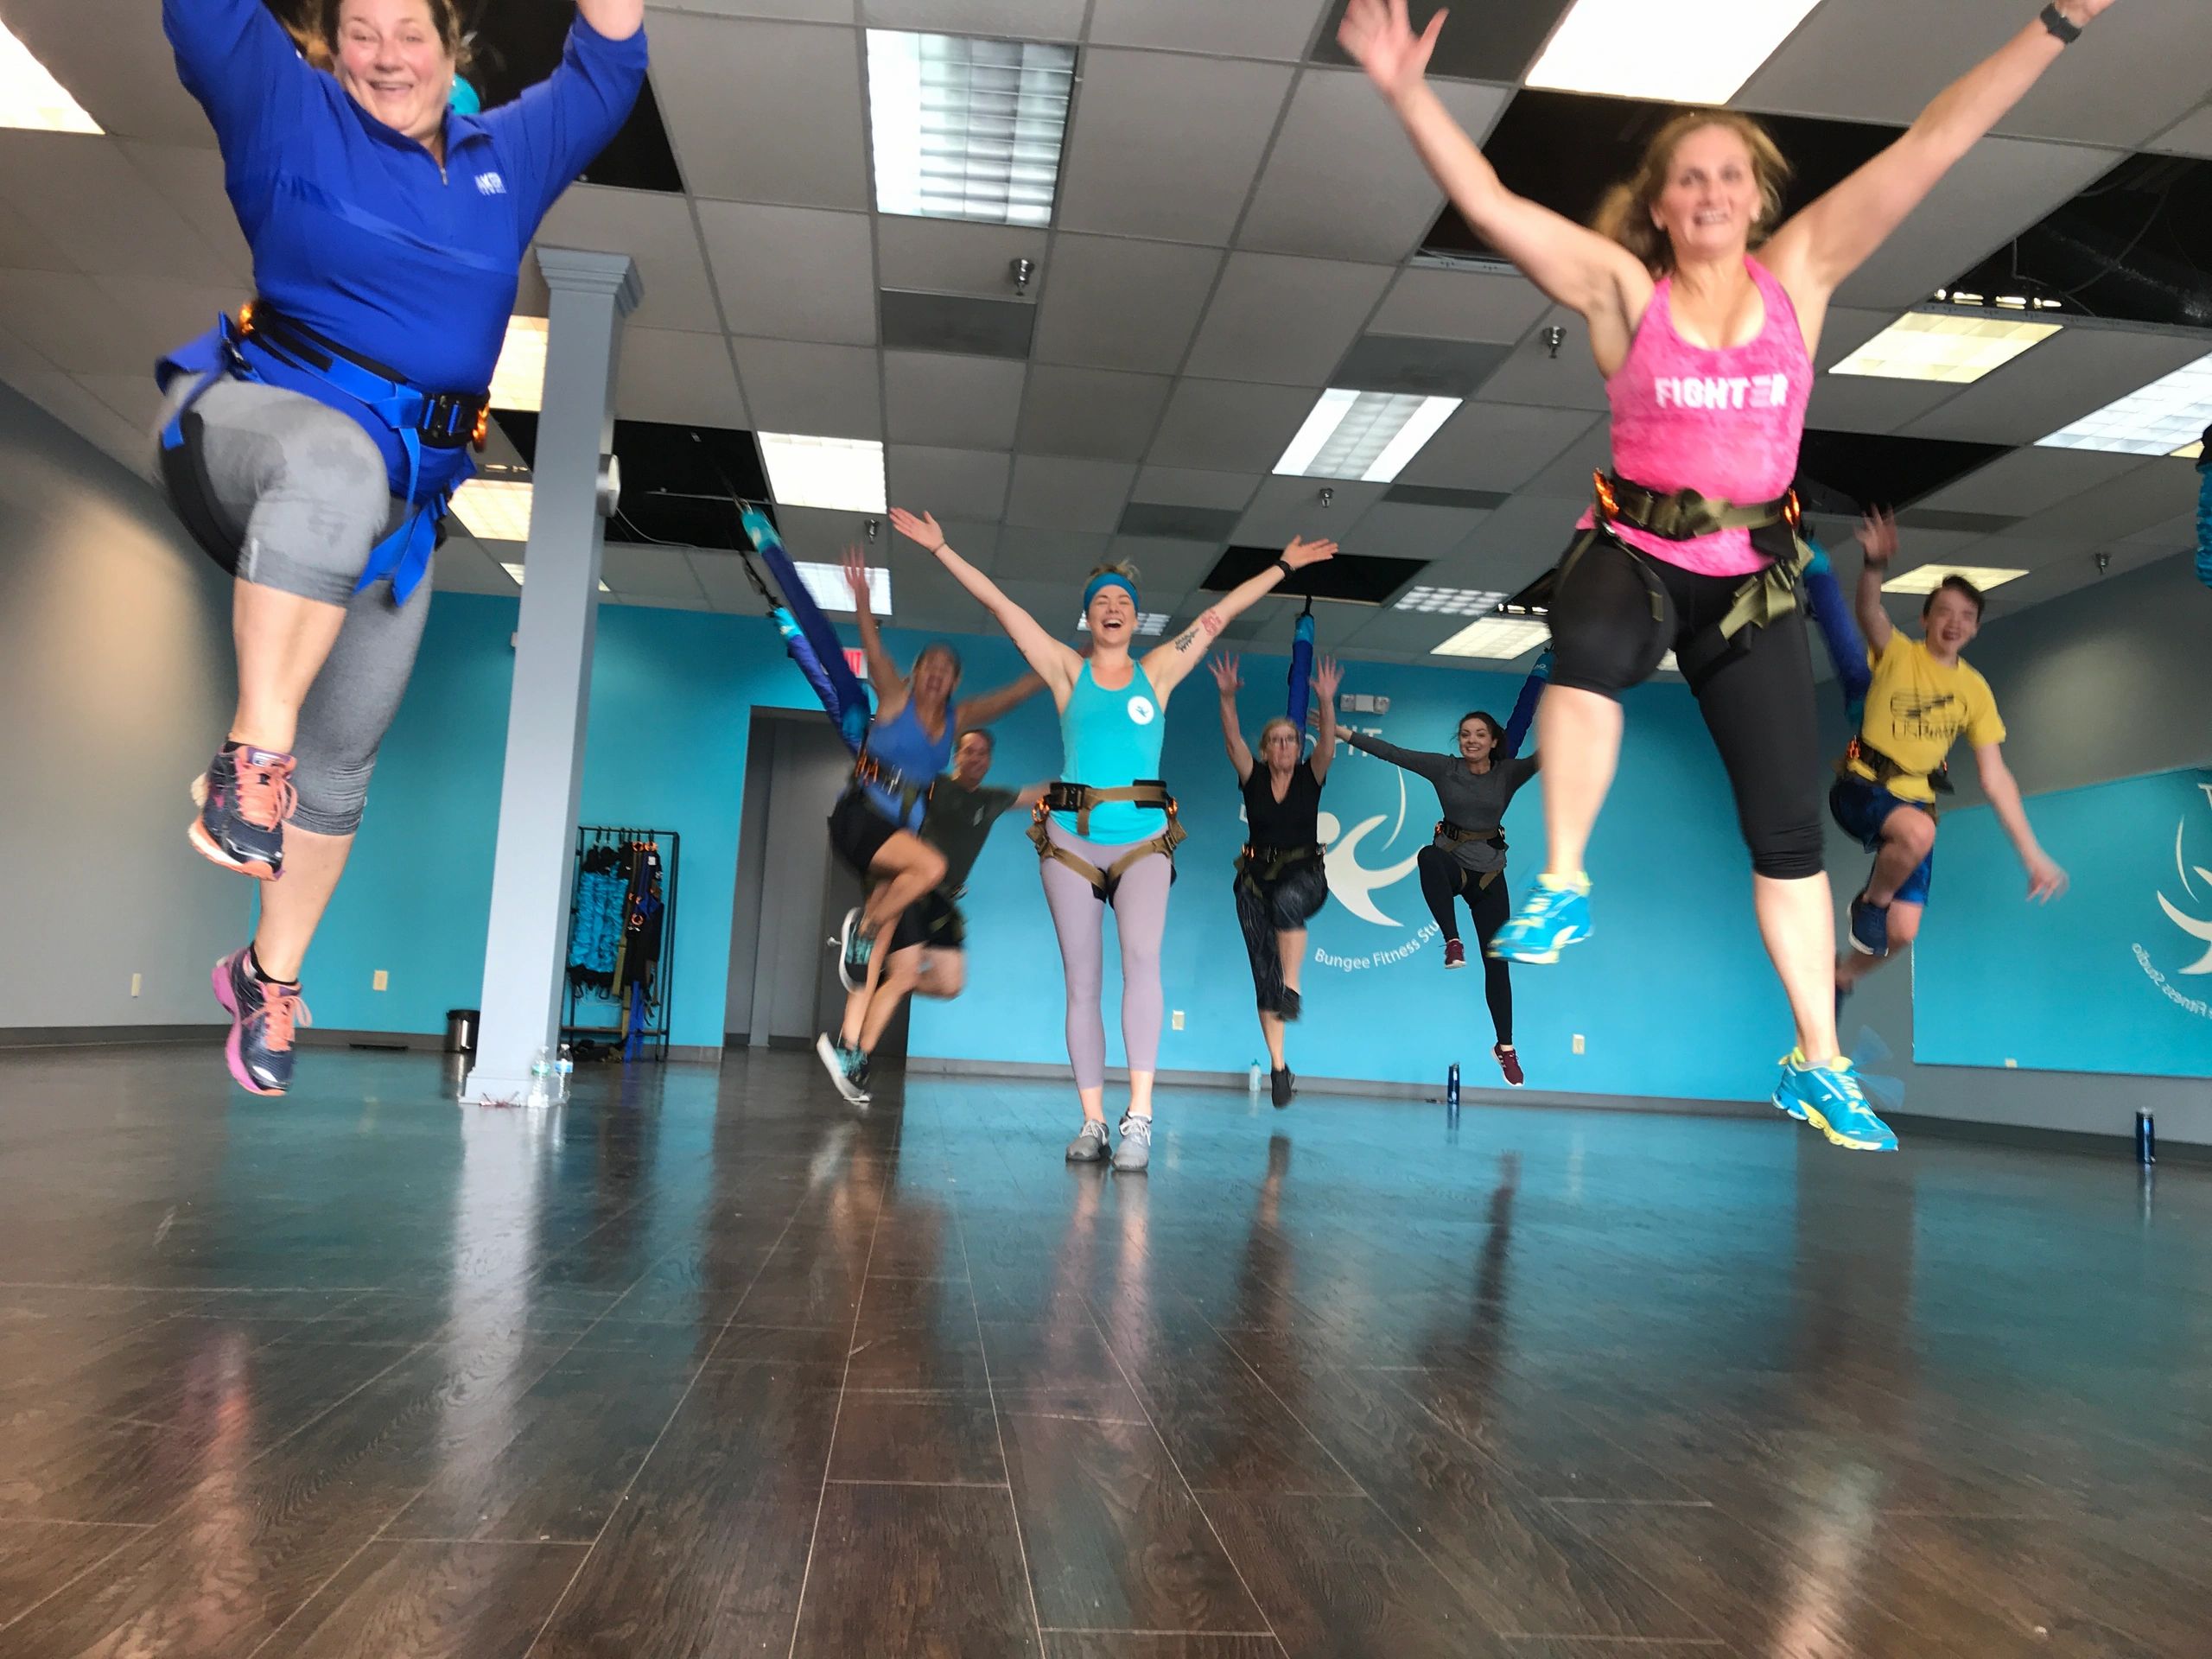 The full-body bungee workout at Pop Fit Studio in Havertown will